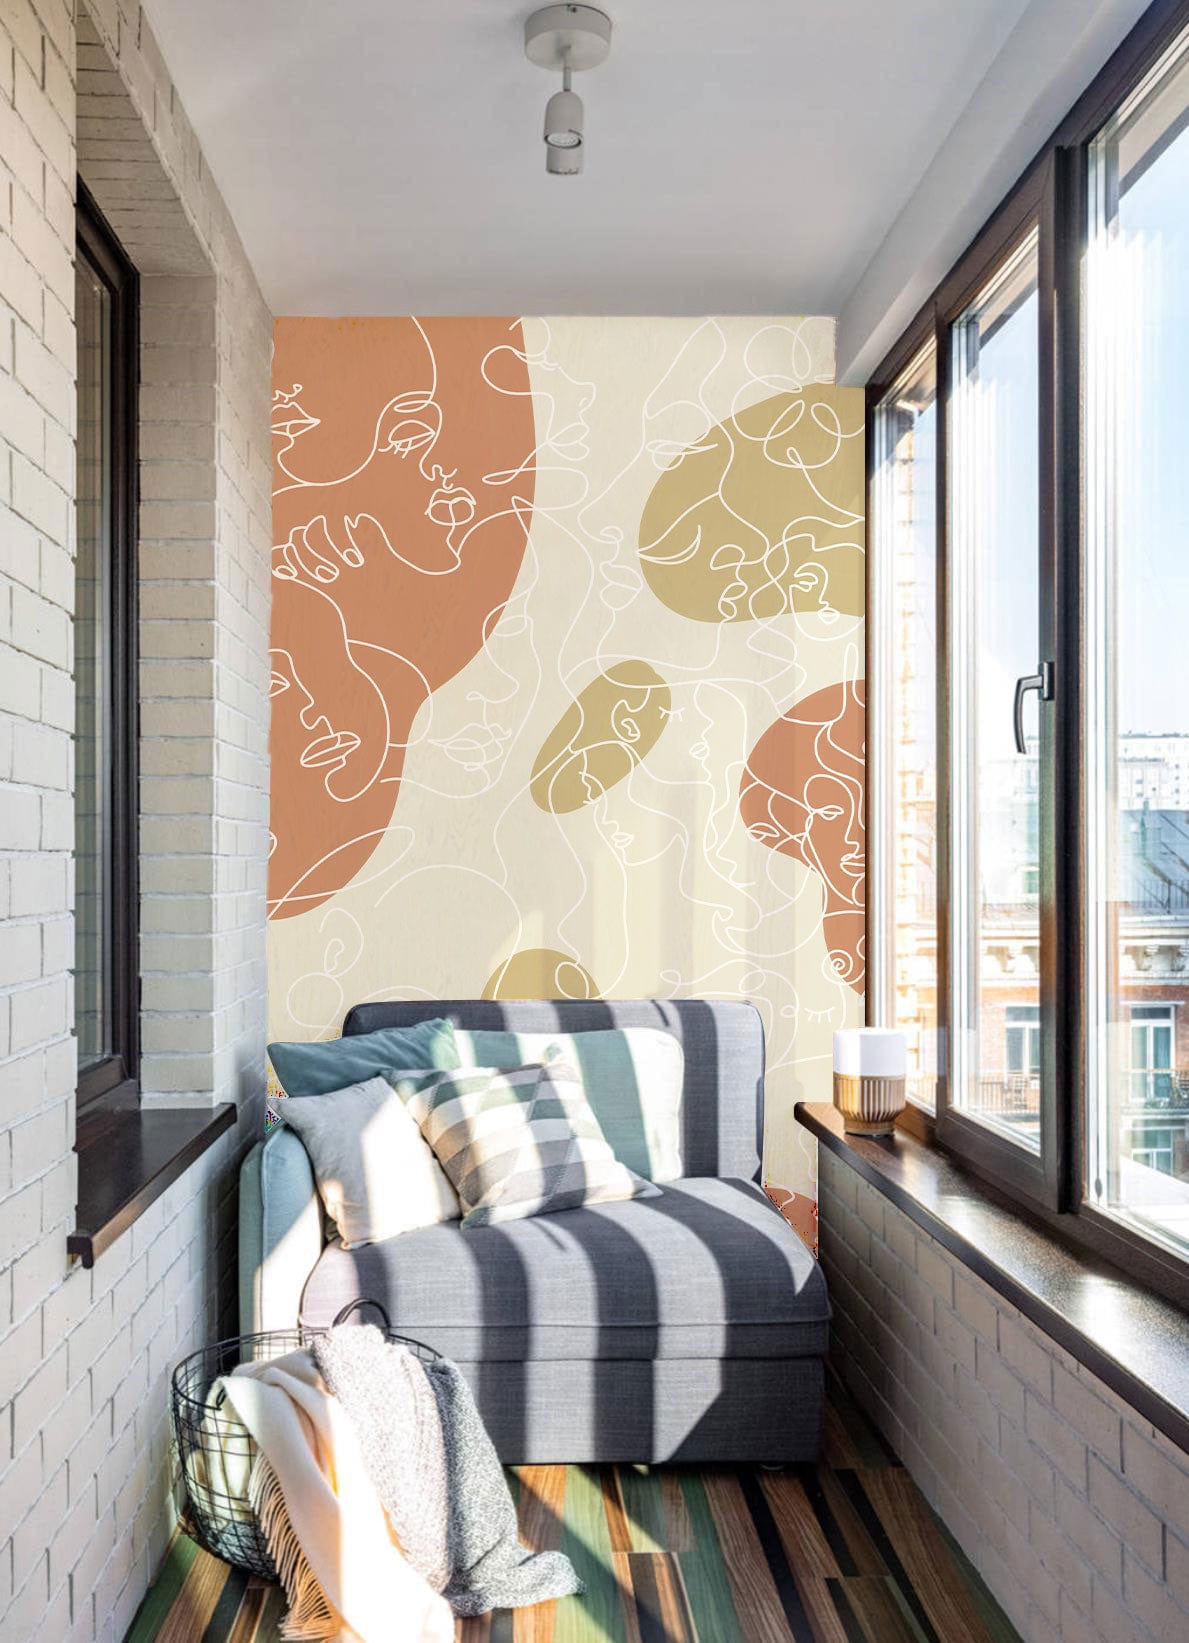 A Wall Mural Featuring Lines of Colorful Abstract Portraits That Can Be Utilized in the Decorating of a Balcony